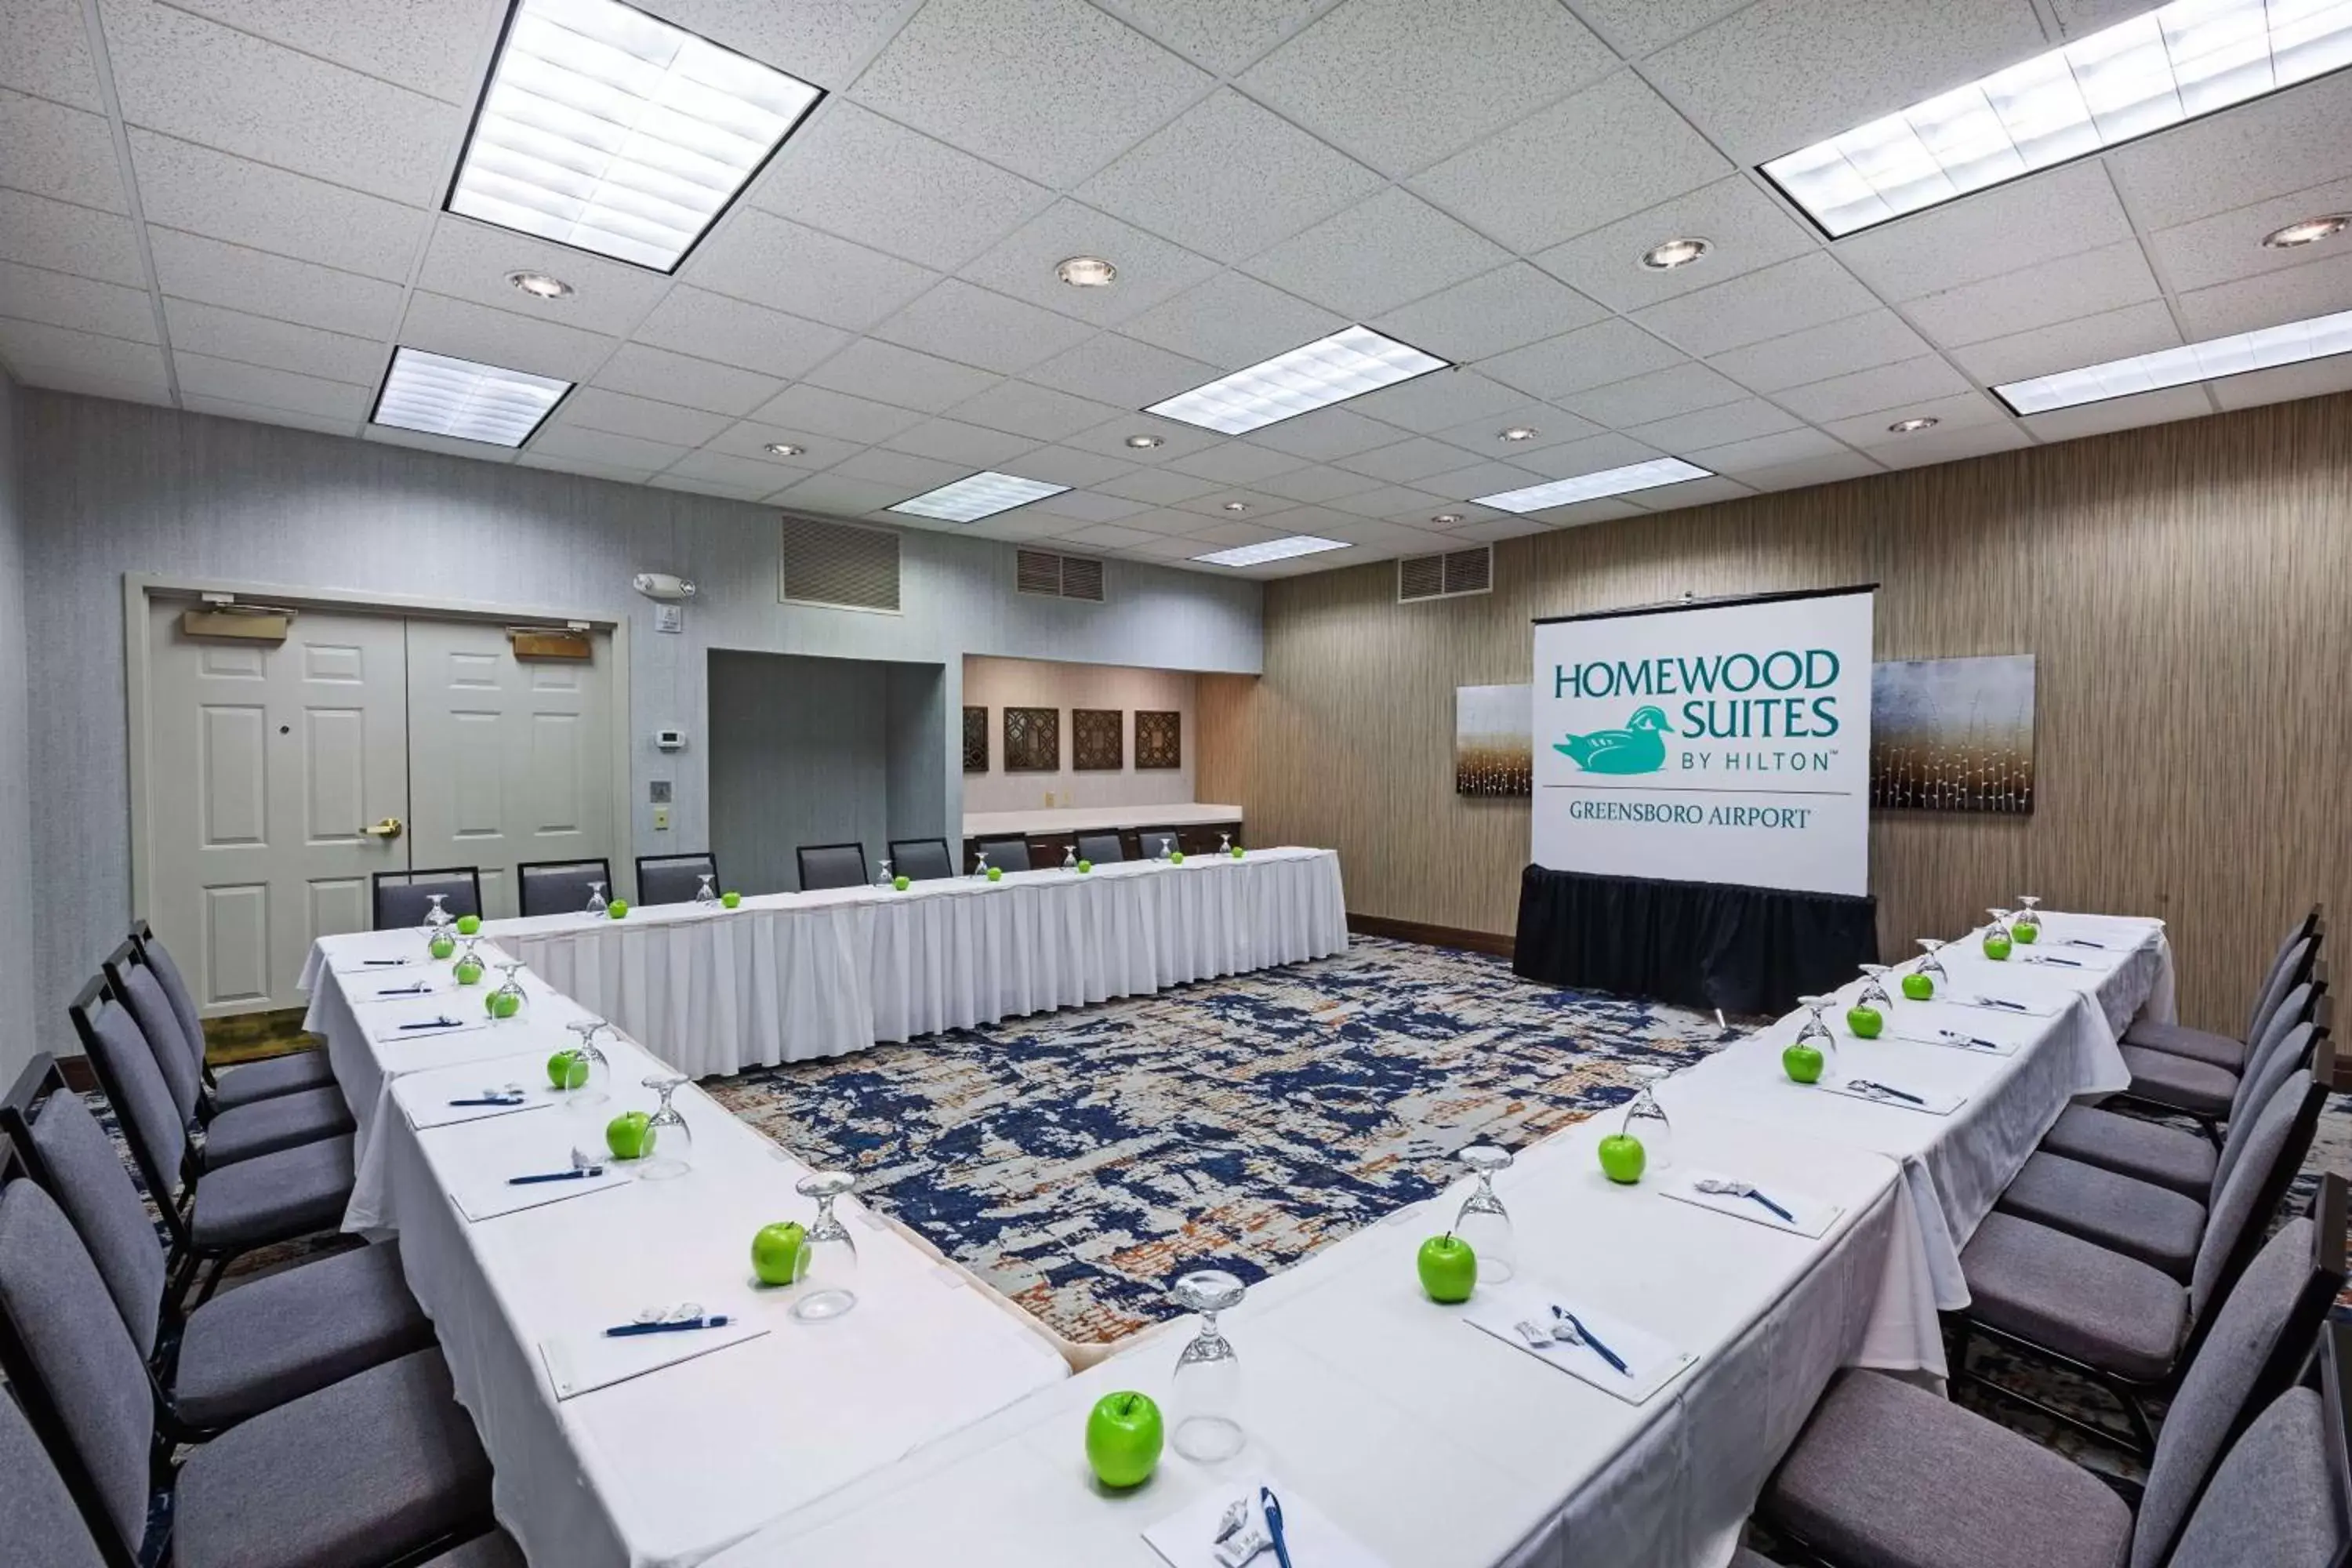 Meeting/conference room in Homewood Suites by Hilton Greensboro